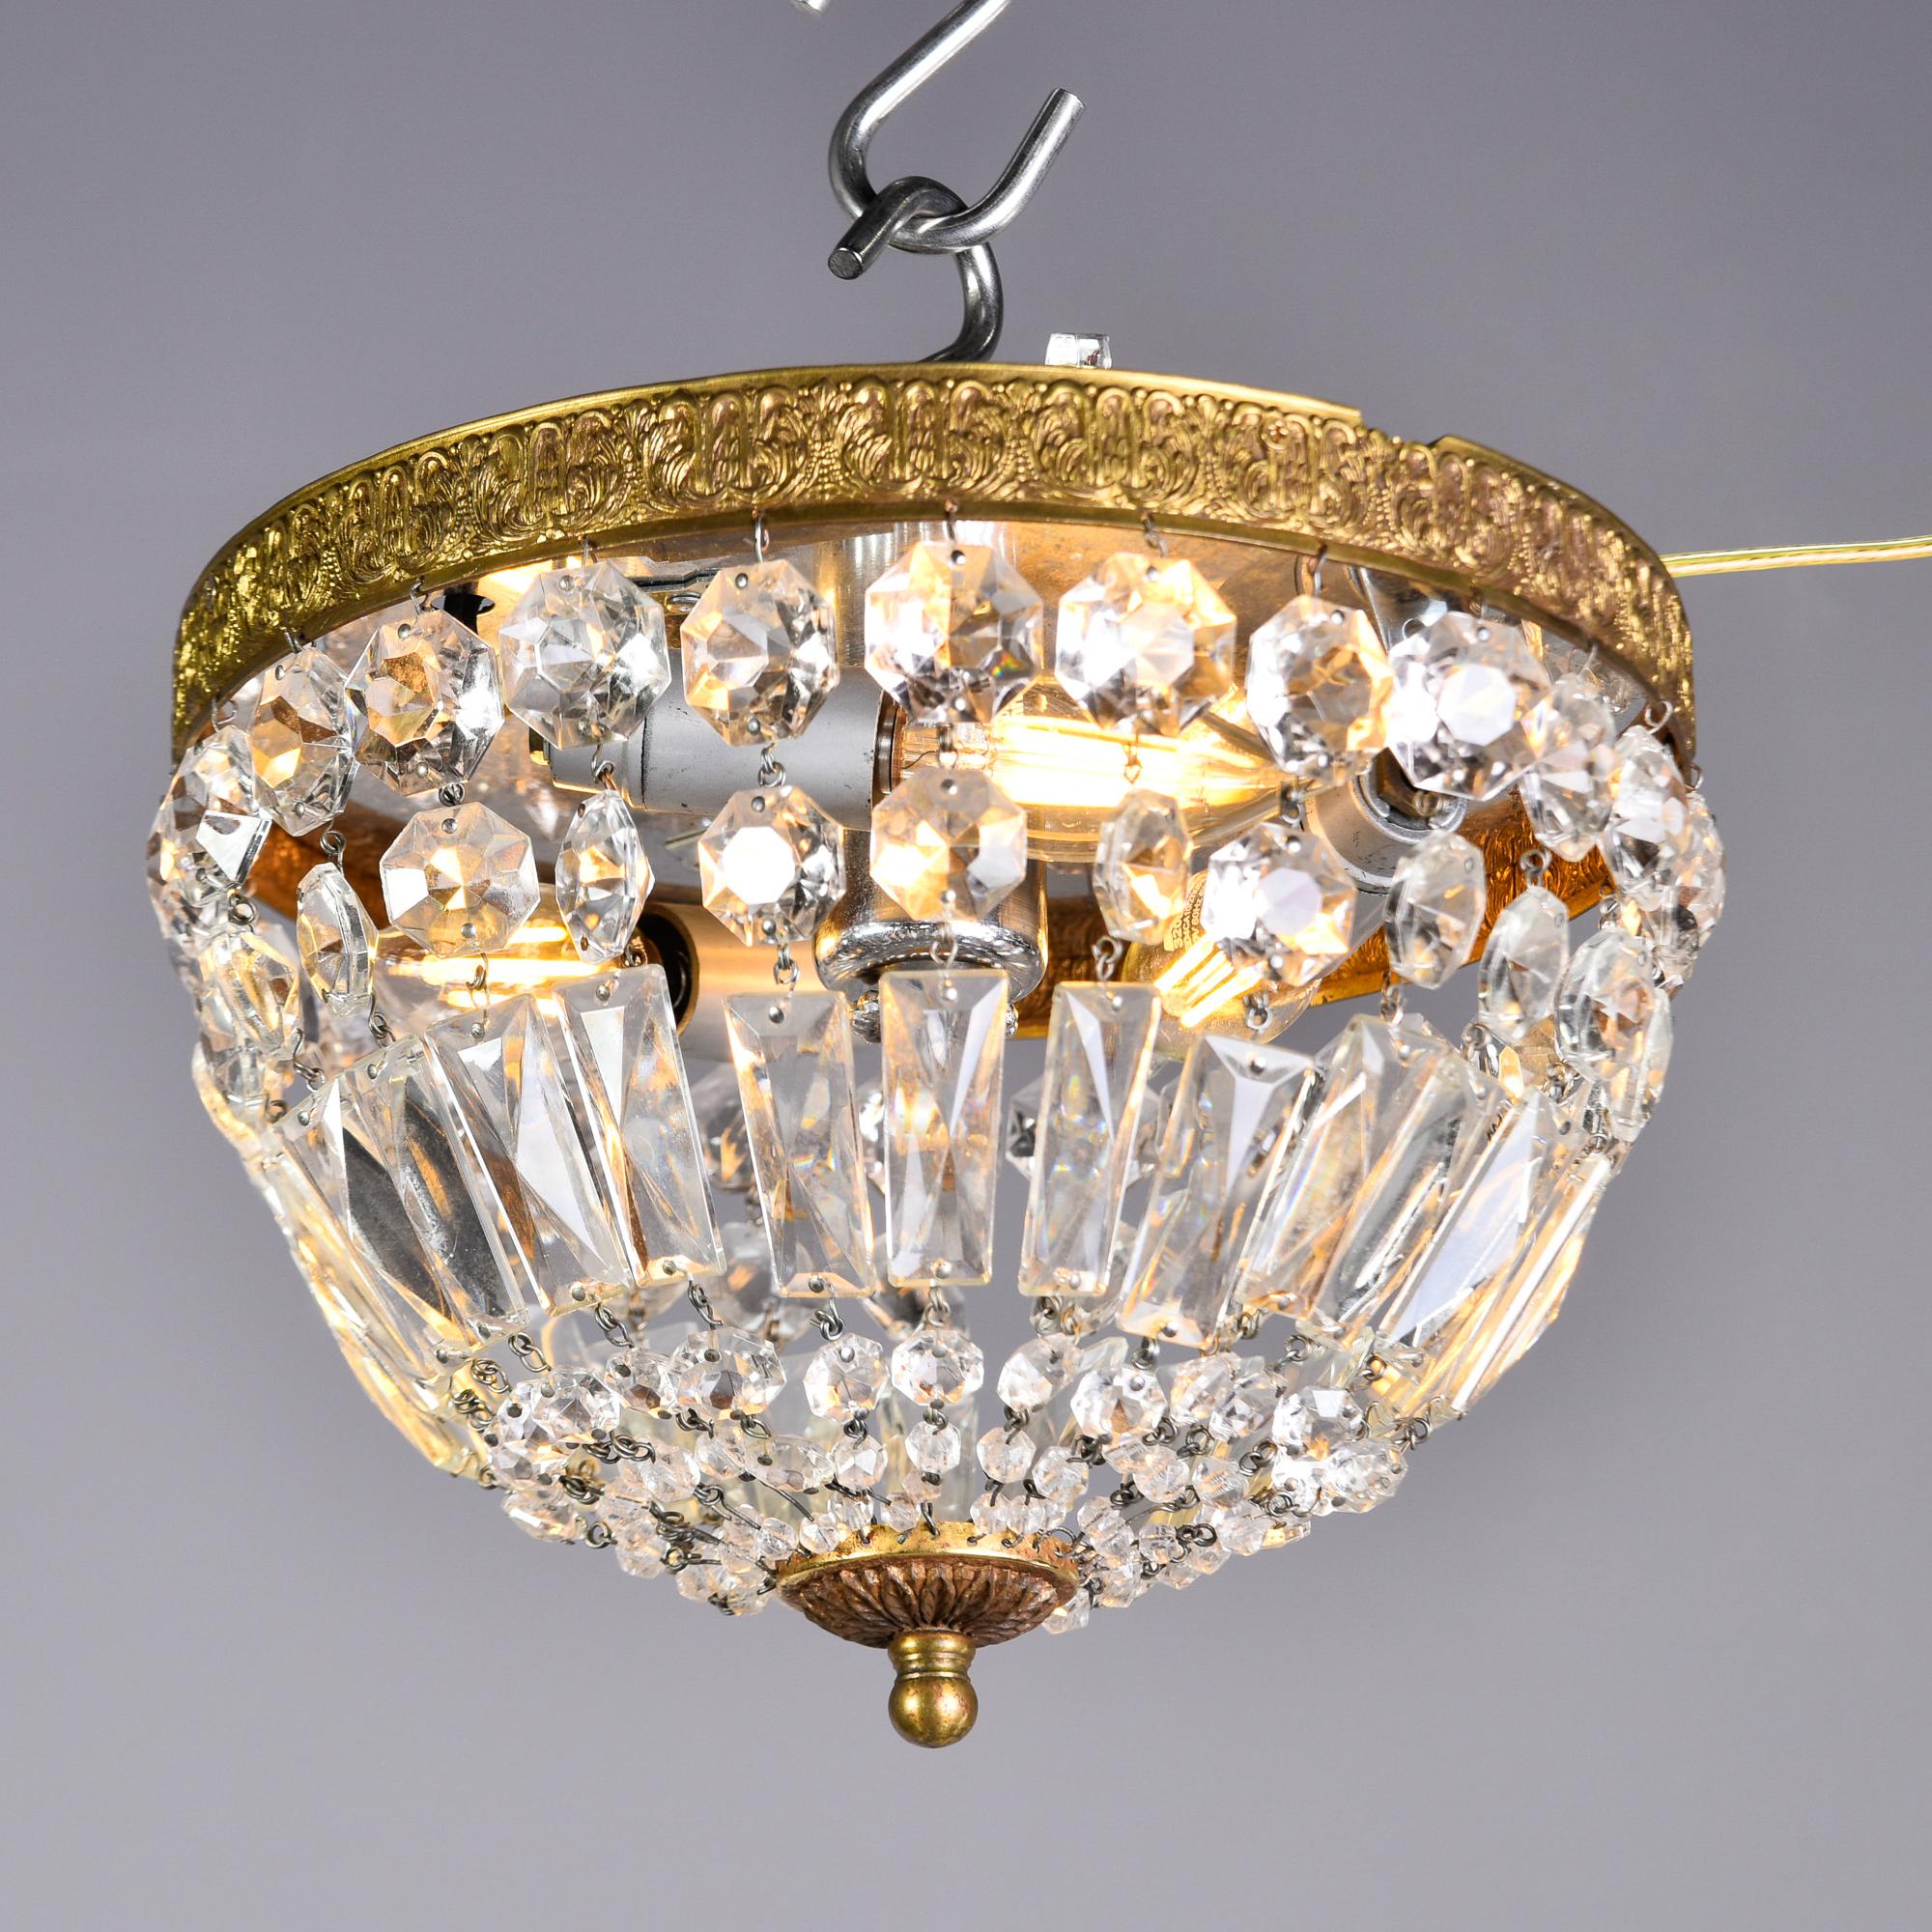 Vintage Italian Crystal and Brass Basket Form Ceiling Fixture For Sale 6